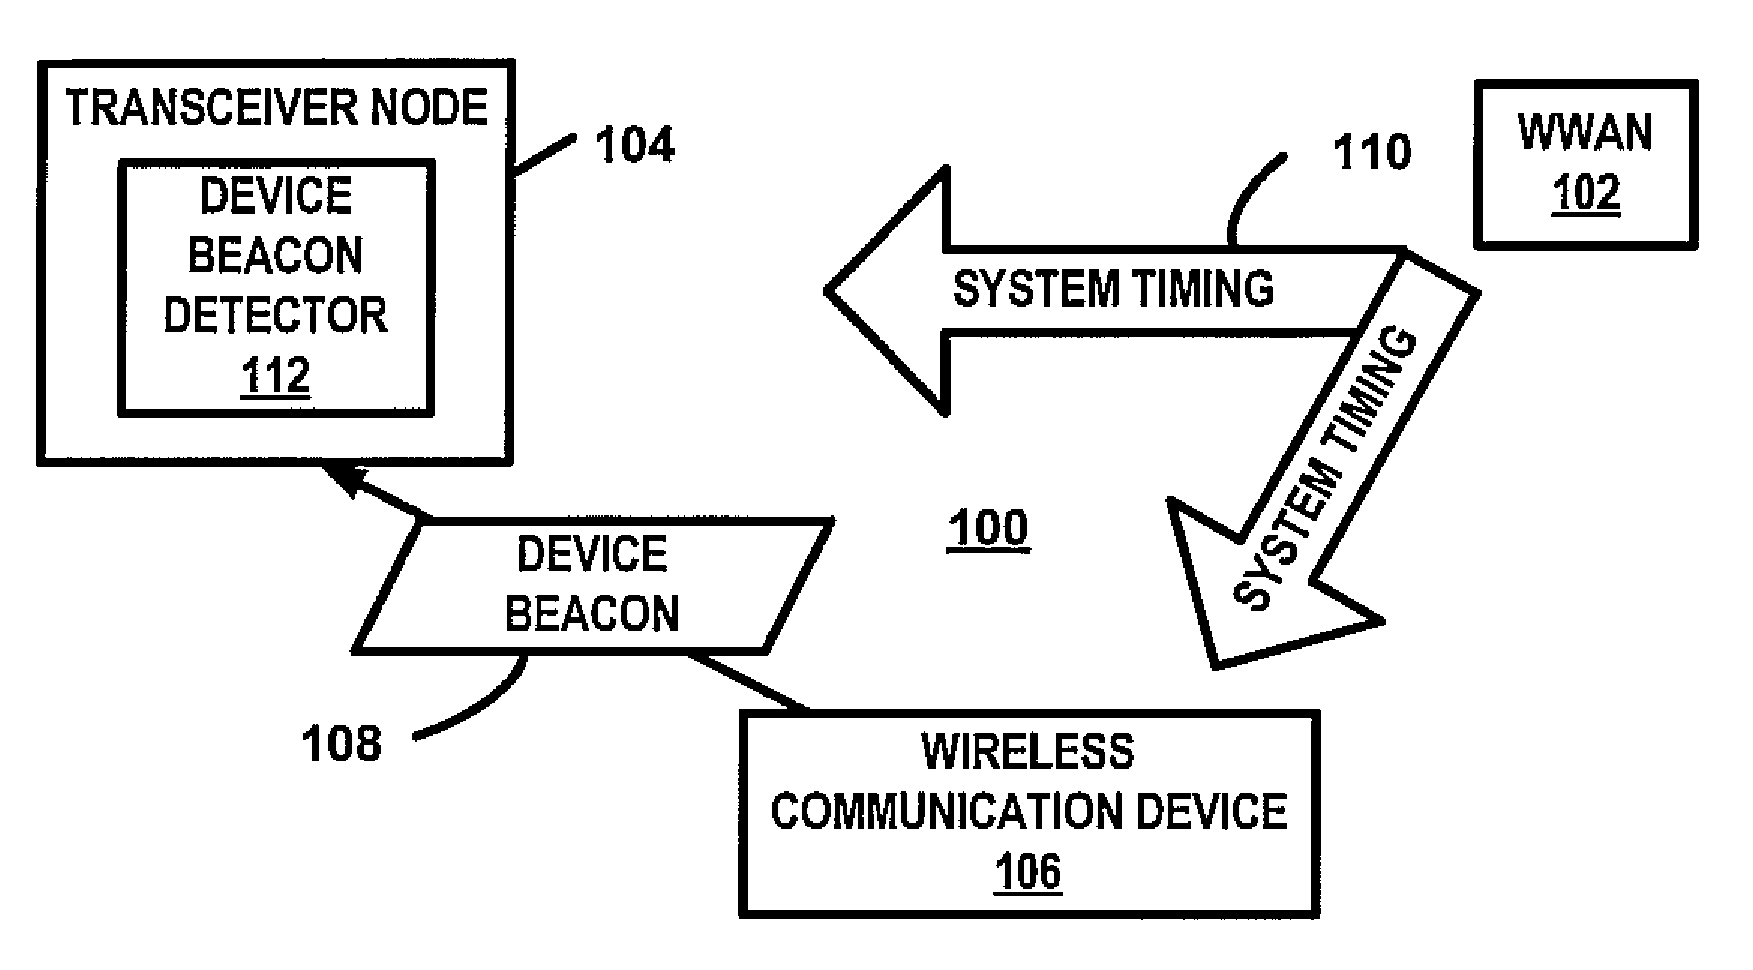 Device beacon for communication management for peer to peer communications